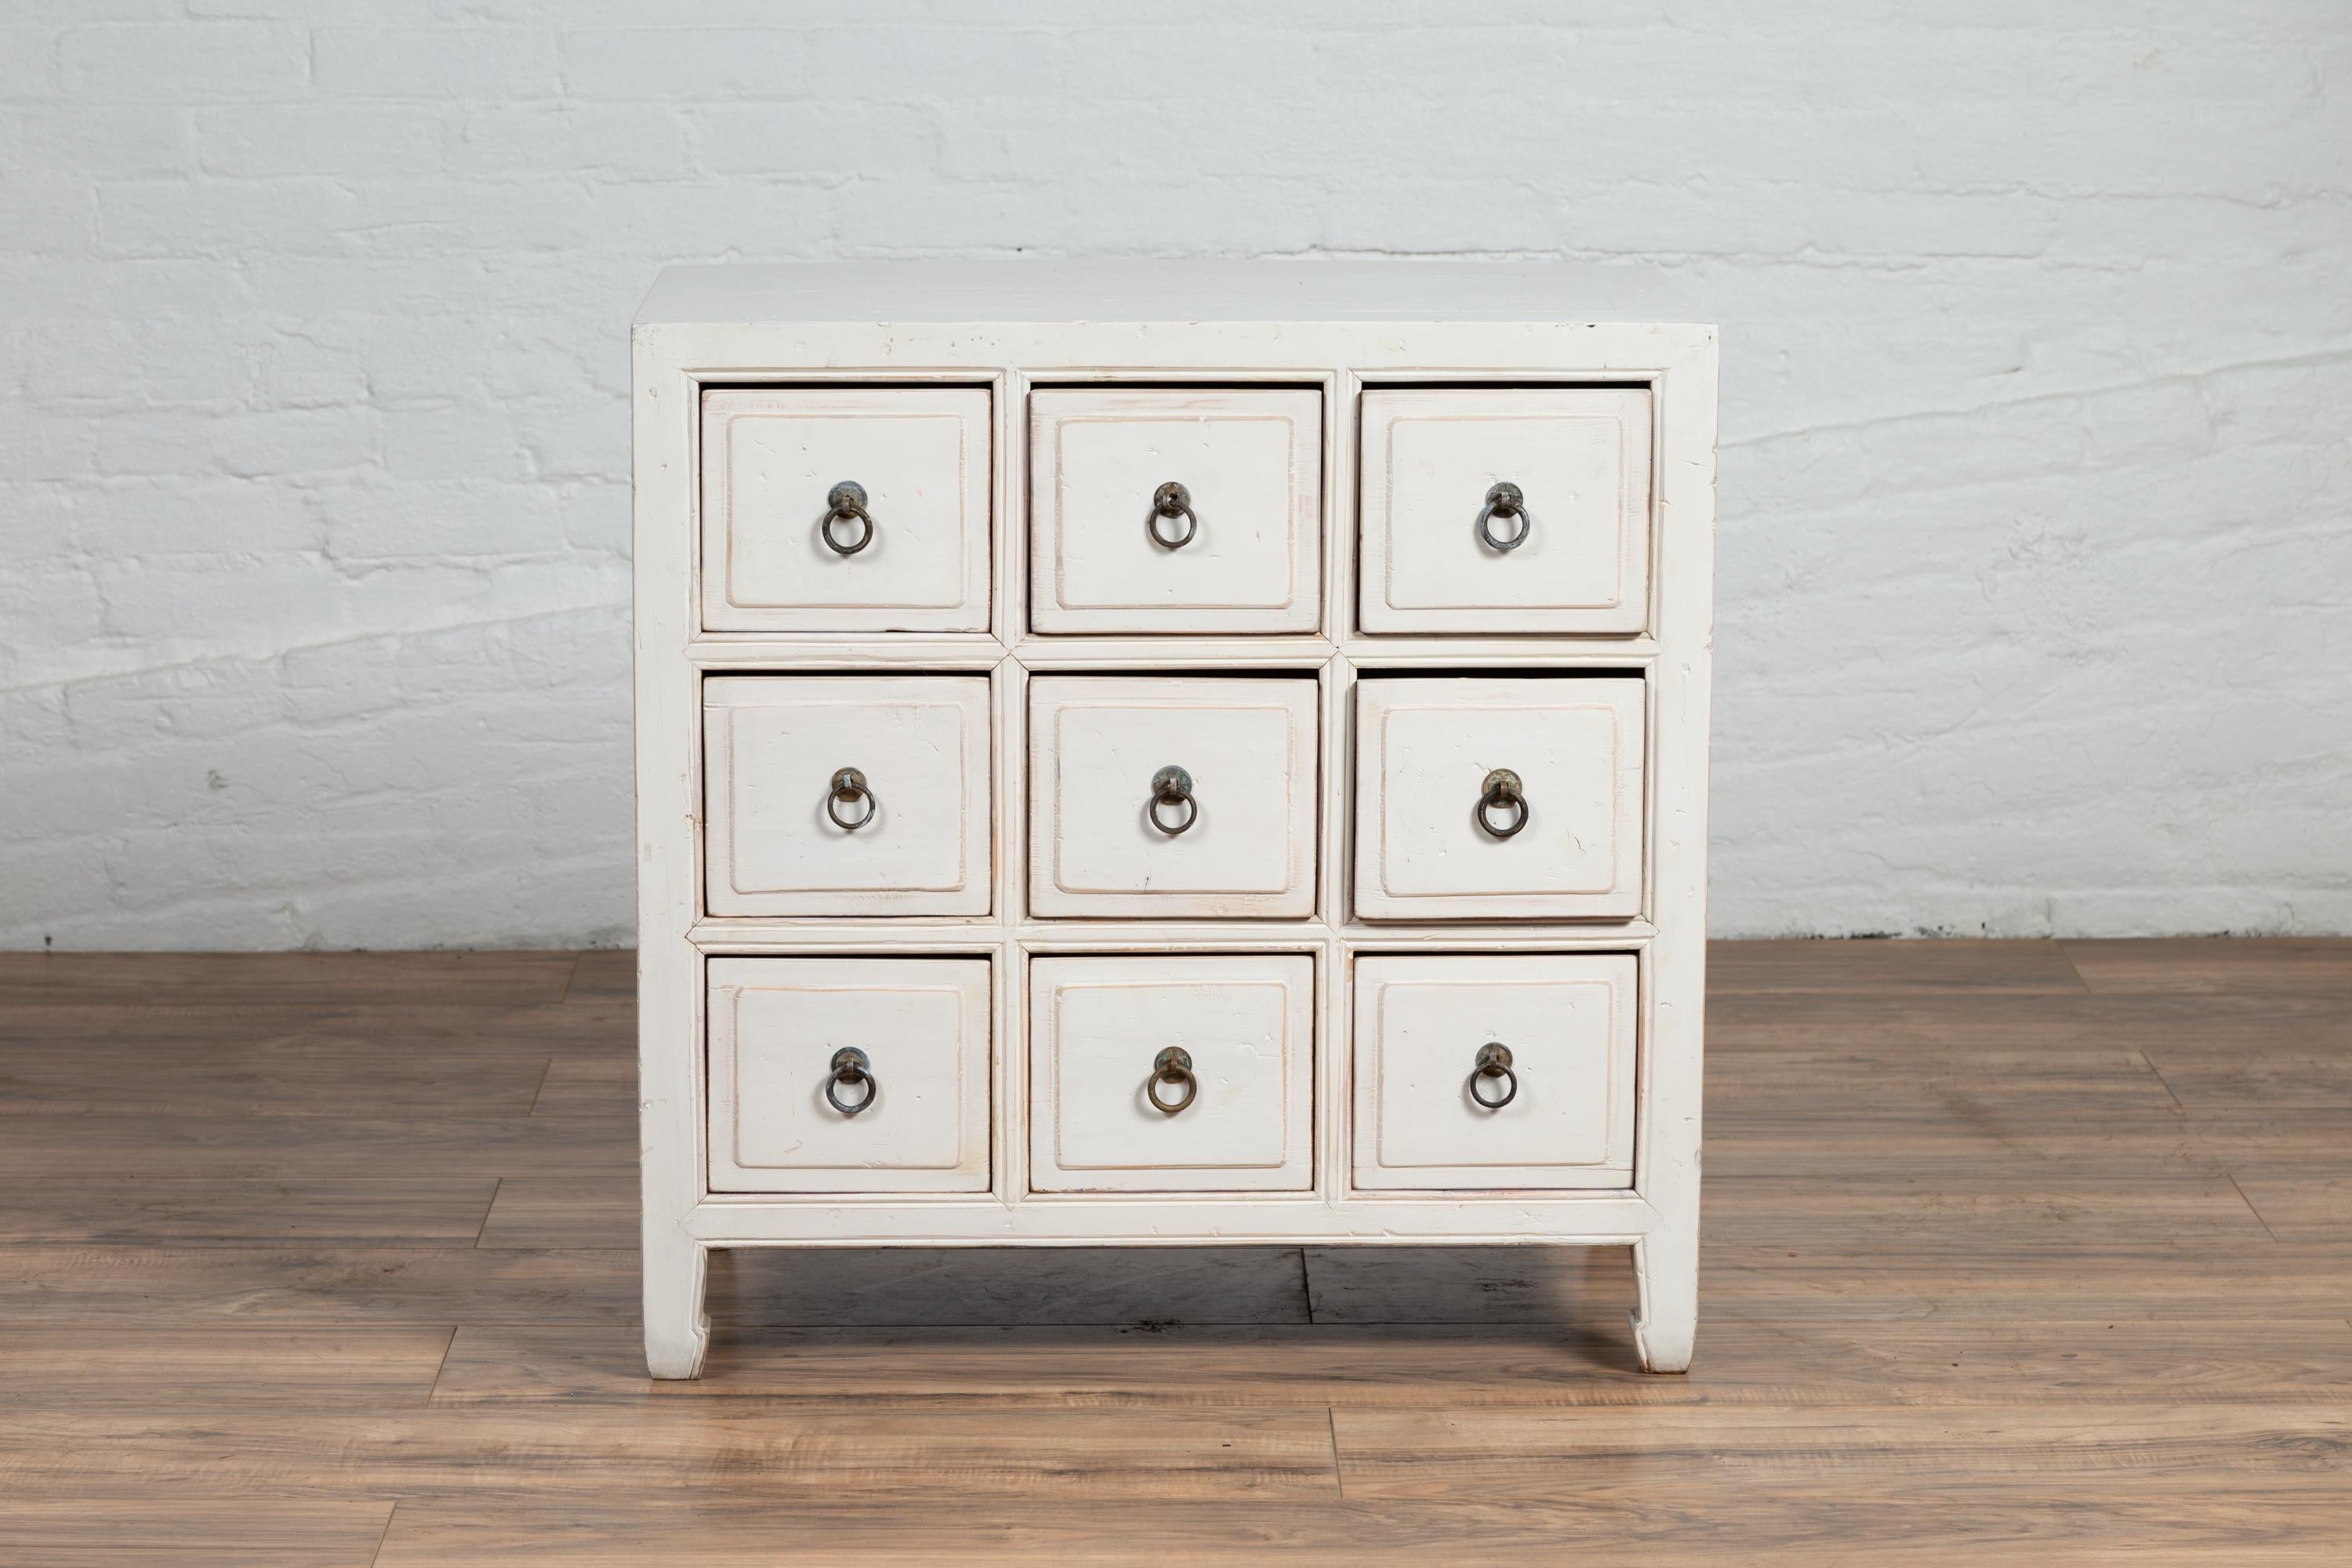 A Chinese vintage white painted wood nine-drawer apothecary chest from the mid-20th century. Born in China during the midcentury period, this lovely apothecary chest features a rectangular top, sitting above a perfectly organized façade, made of